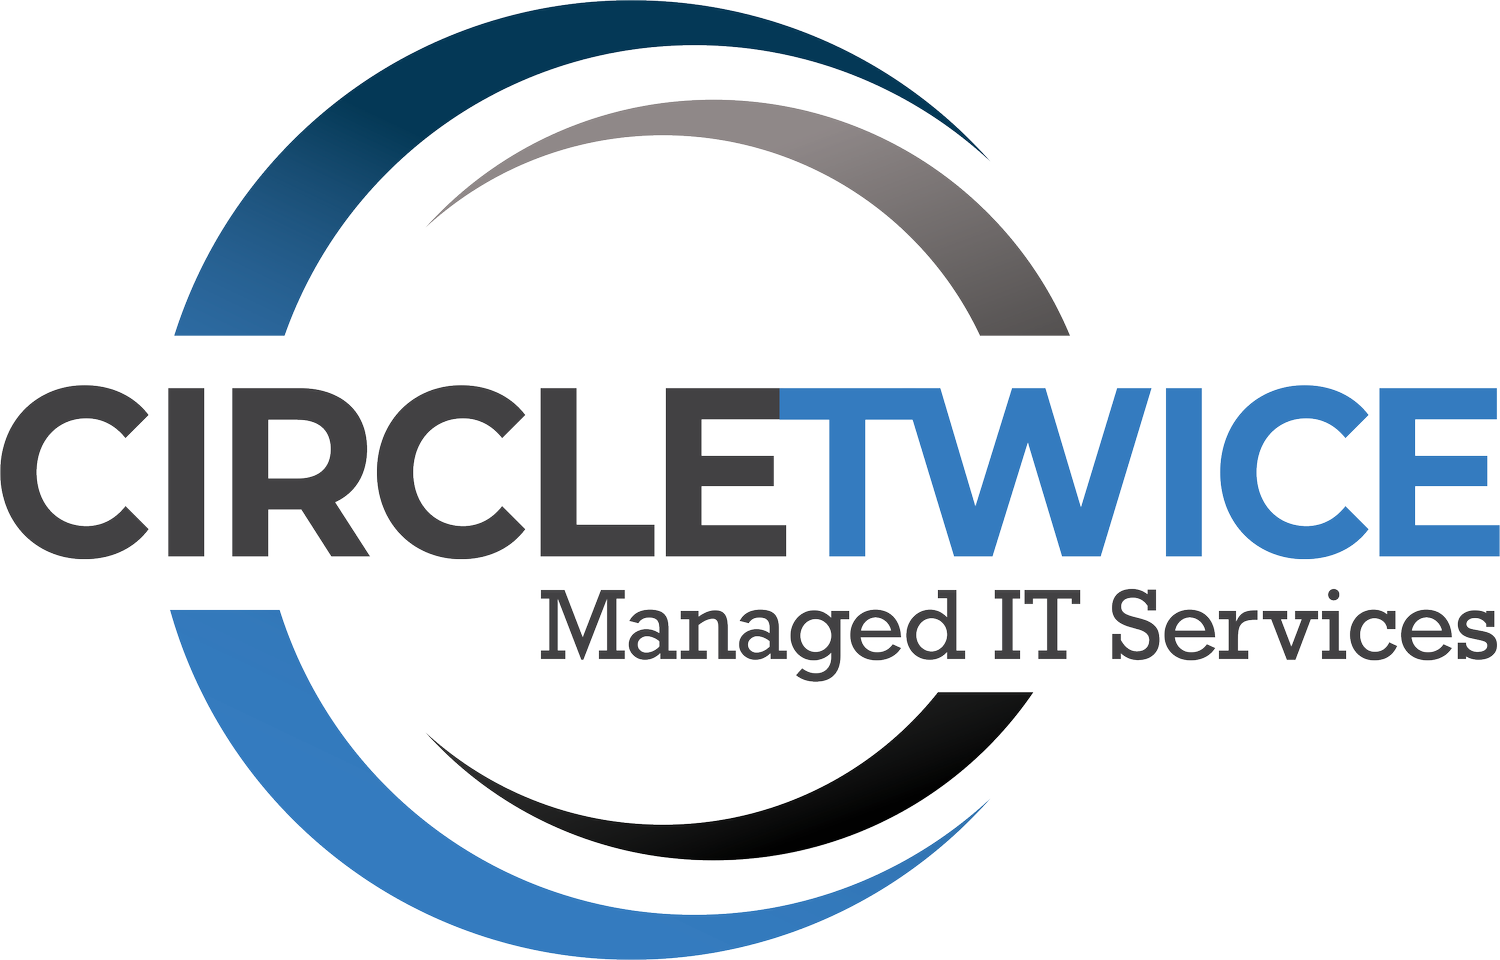 Circle Twice Managed IT Services